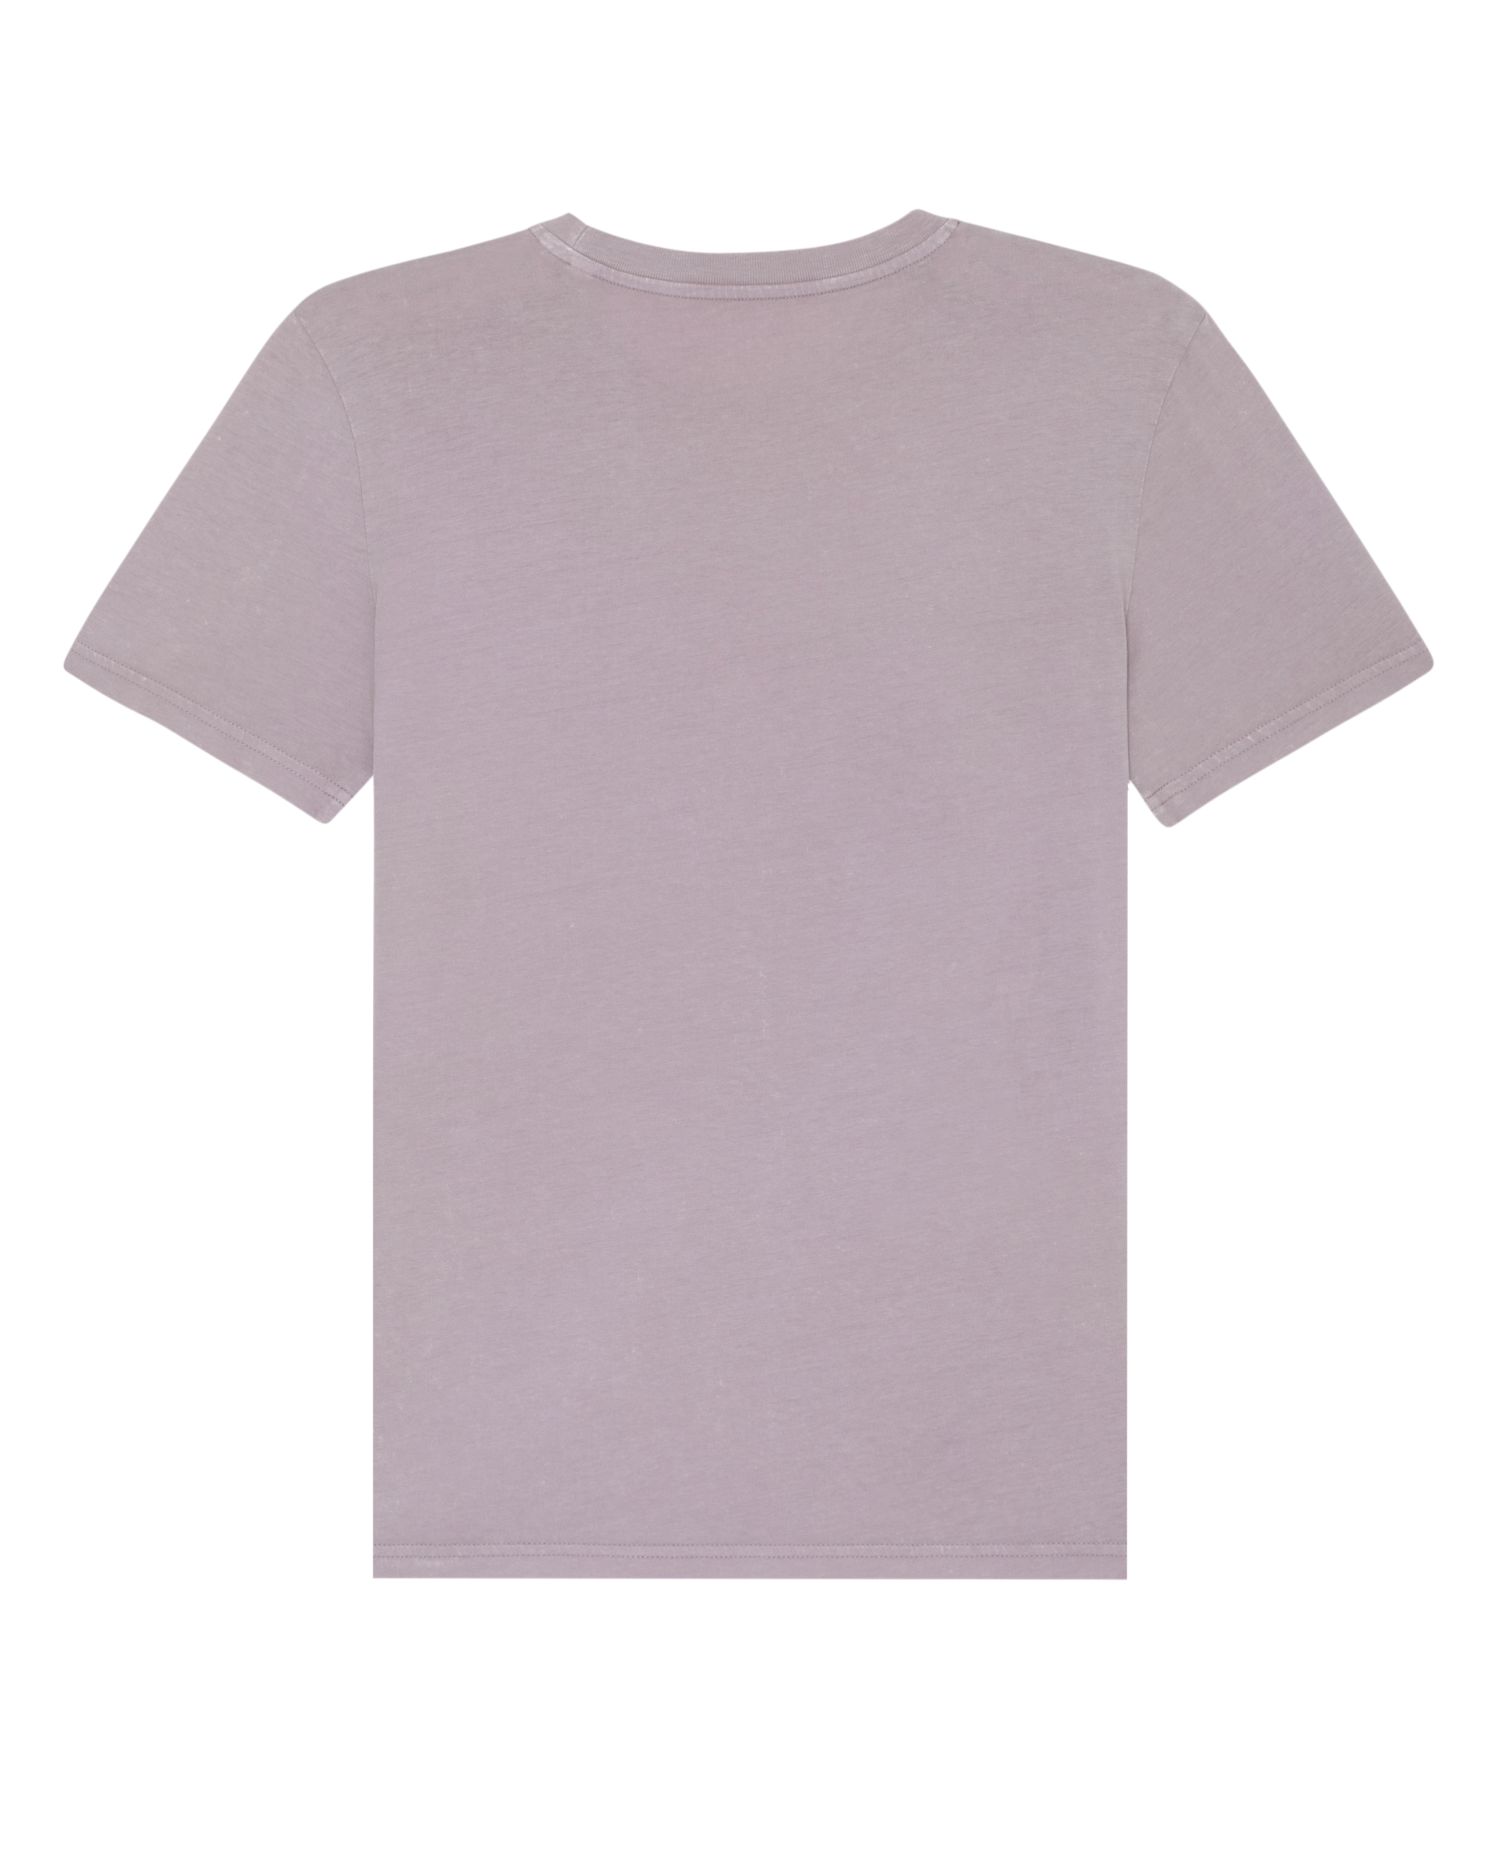 T-Shirt Creator Vintage in Farbe G. Dyed Aged Lilac Petal